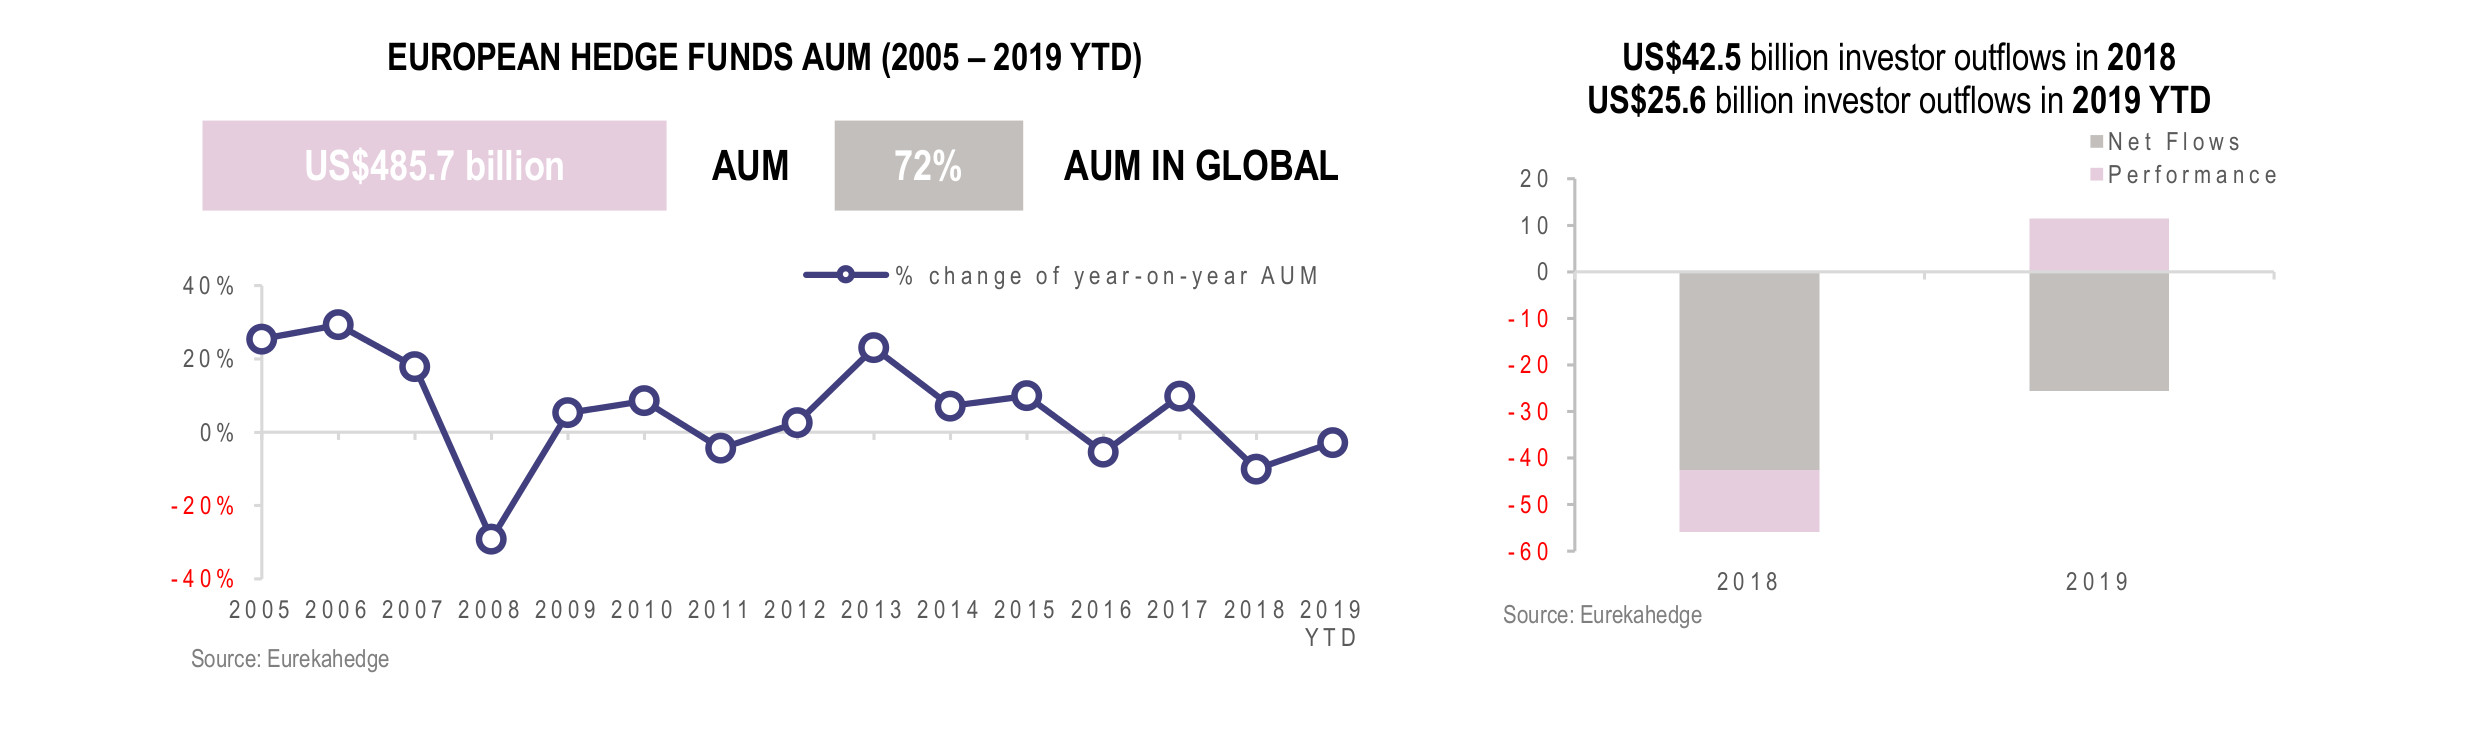 European Hedge Funds Infographic July 2019 - AUM